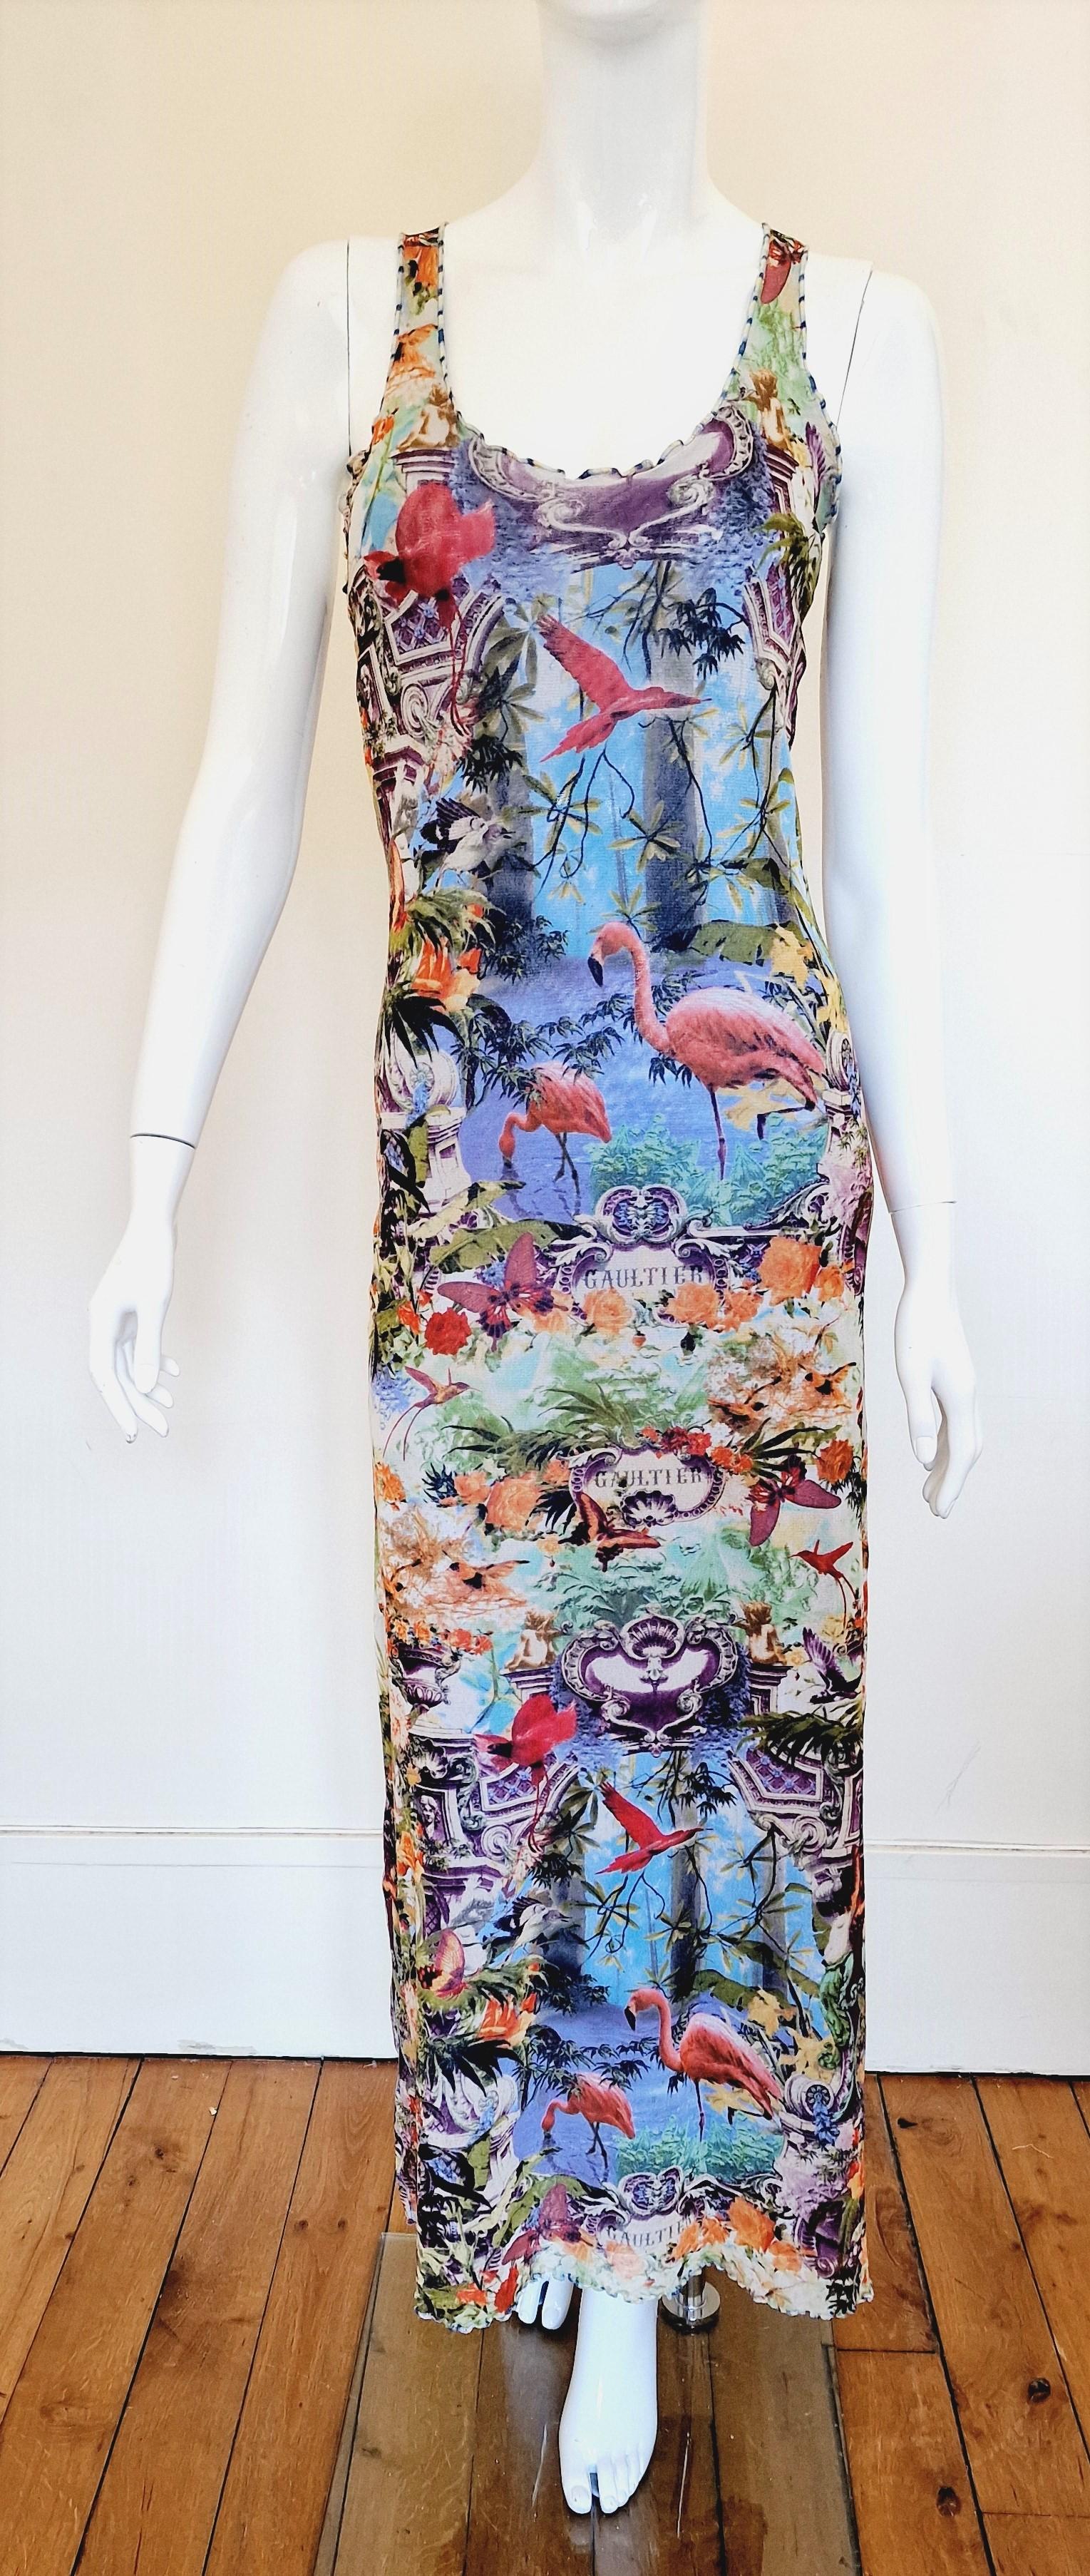 Wonderful tropical dress by Jean Paul Gaultier!
Super vintage piece from the 90s!
Bella Hadid wears the same pattern, check the photos!

Flamingos, butterflies, Italian baroque motifs, angel sculptures, 